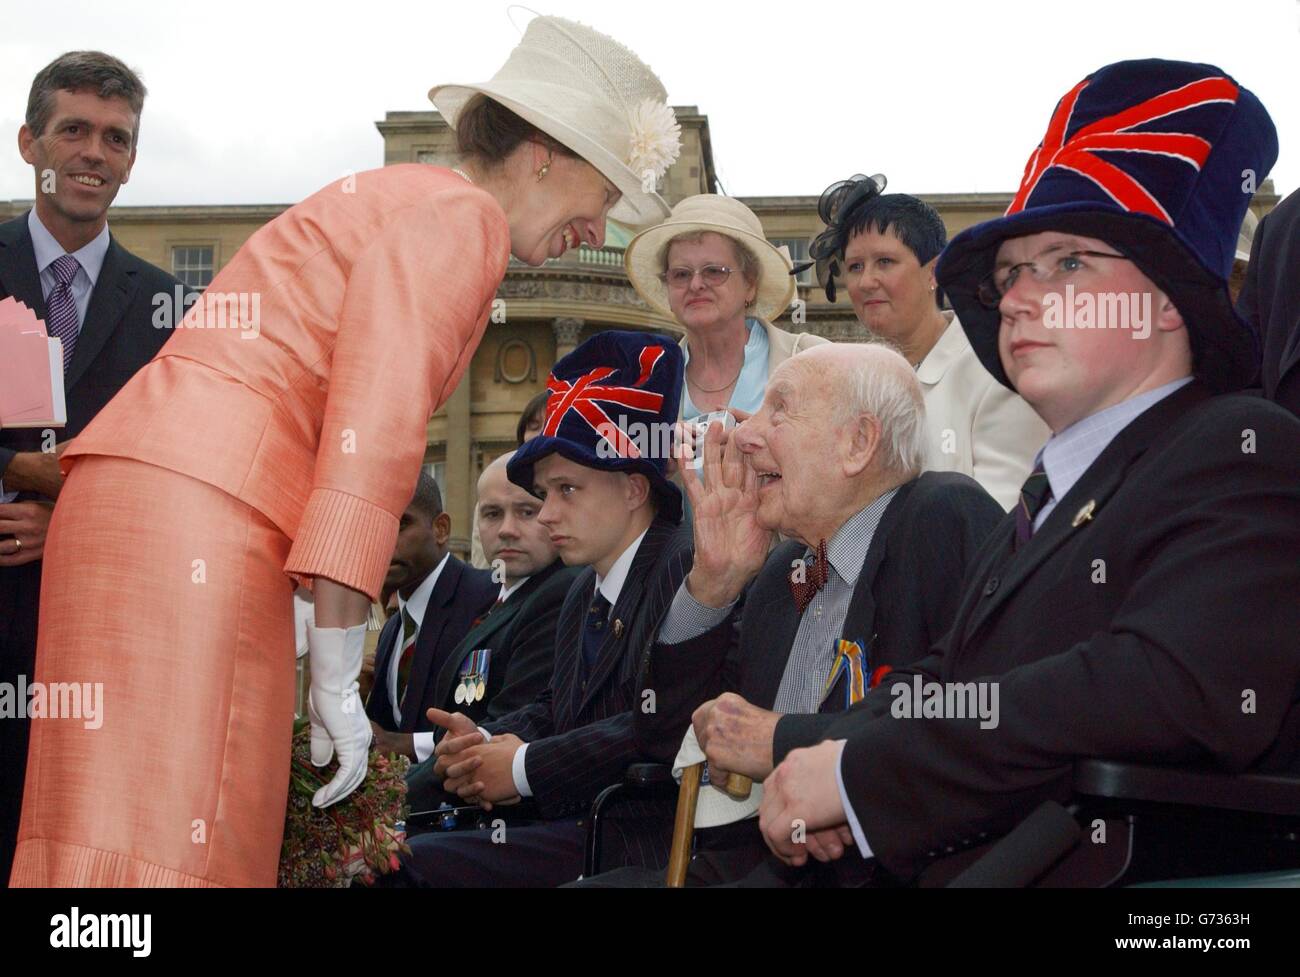 The Princess Royal meets Henry Allingham (right), (aged 108) during a garden party at Buckingham Palace, central London. Two First World War veterans were the toast of Buckingham Palace today as the distinguished servicemen made their appearance at a Royal garden party. Henry Allingham, 108, and William Stone, 103, were among those who met the Princess Royal, patron of the Not Forgotten Association, which was set up for ex-service disabled. Stock Photo